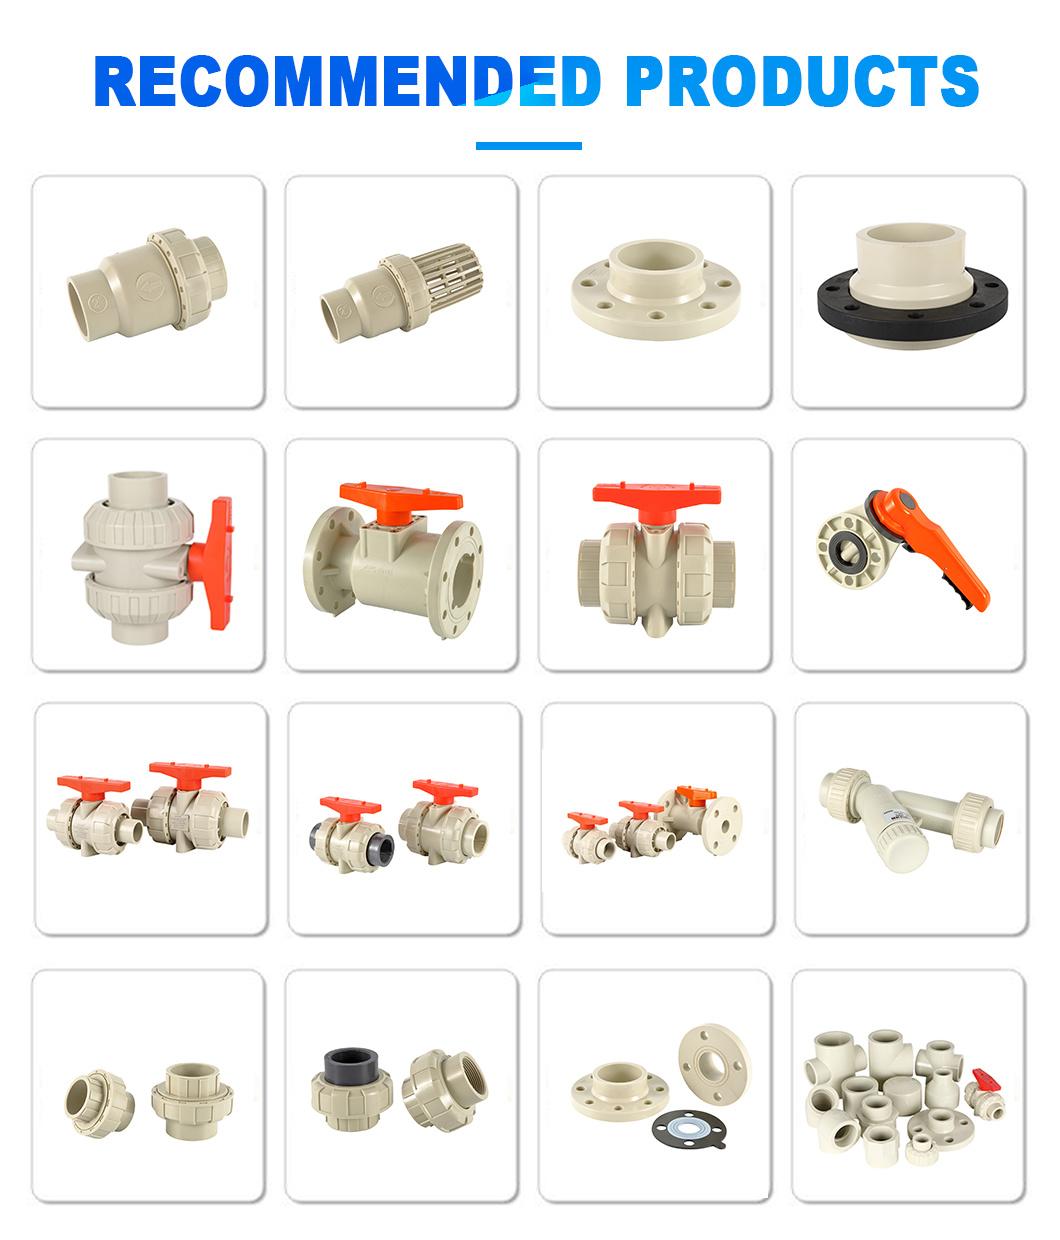 High Quality Pph Pipe Fittings According to DIN ANSI Standard Van Stone Flange